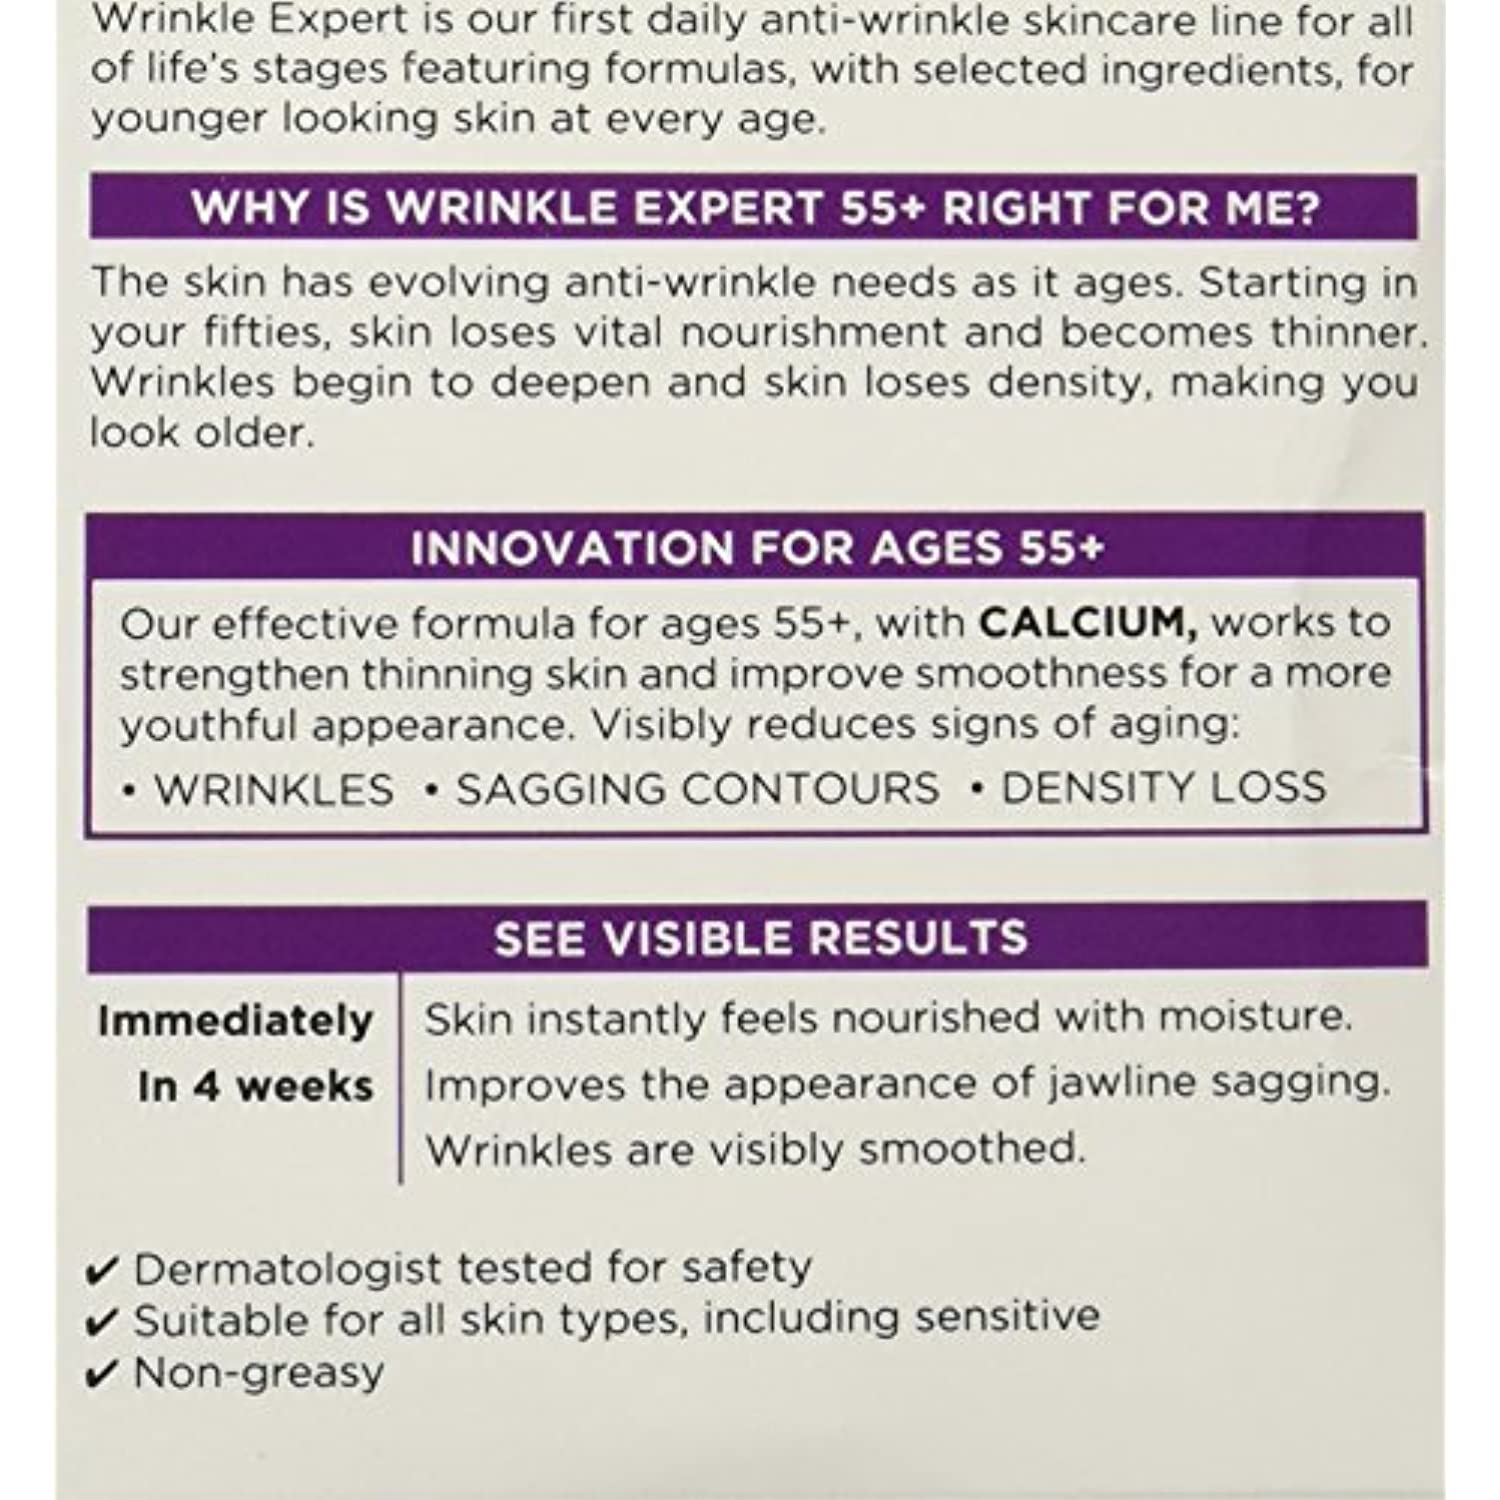 Loreal Paris Skincare Wrinkle Expert 55+ Anti-Aging Face Moisturizer With Calcium Non-Greasy Suitable For Sensitive Skin 1.7 Fl; Oz. - image 2 of 3